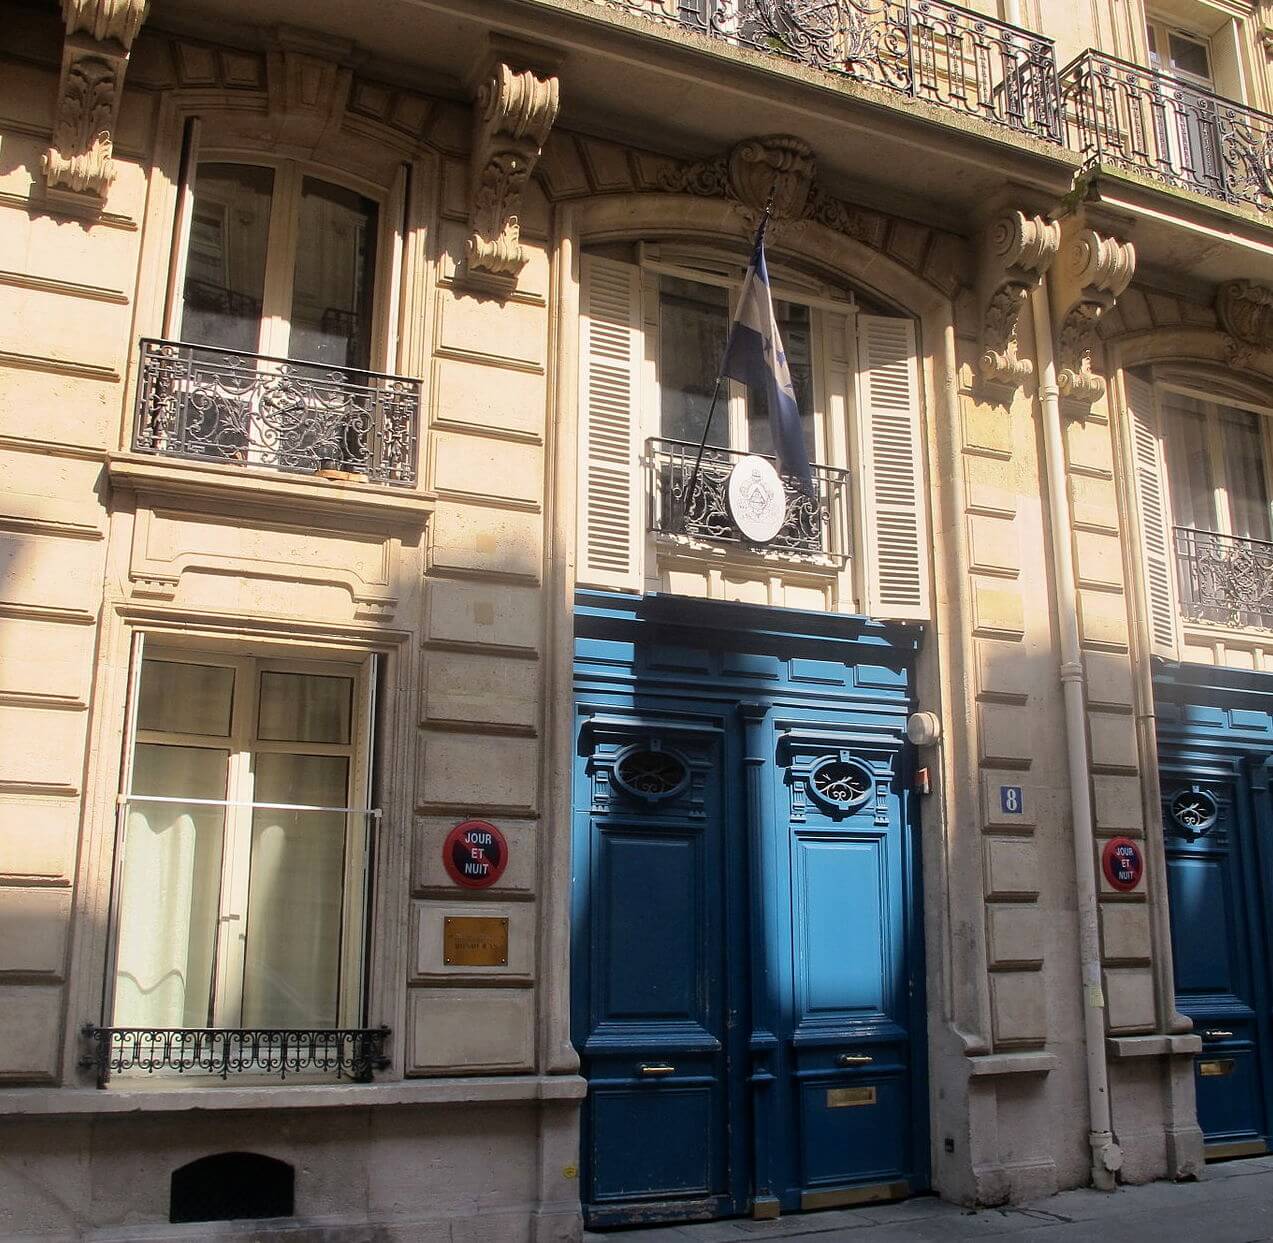 Embassy of Honduras in France, 16th arrondissement of Paris by Celette (CC BY-SA 3.0)